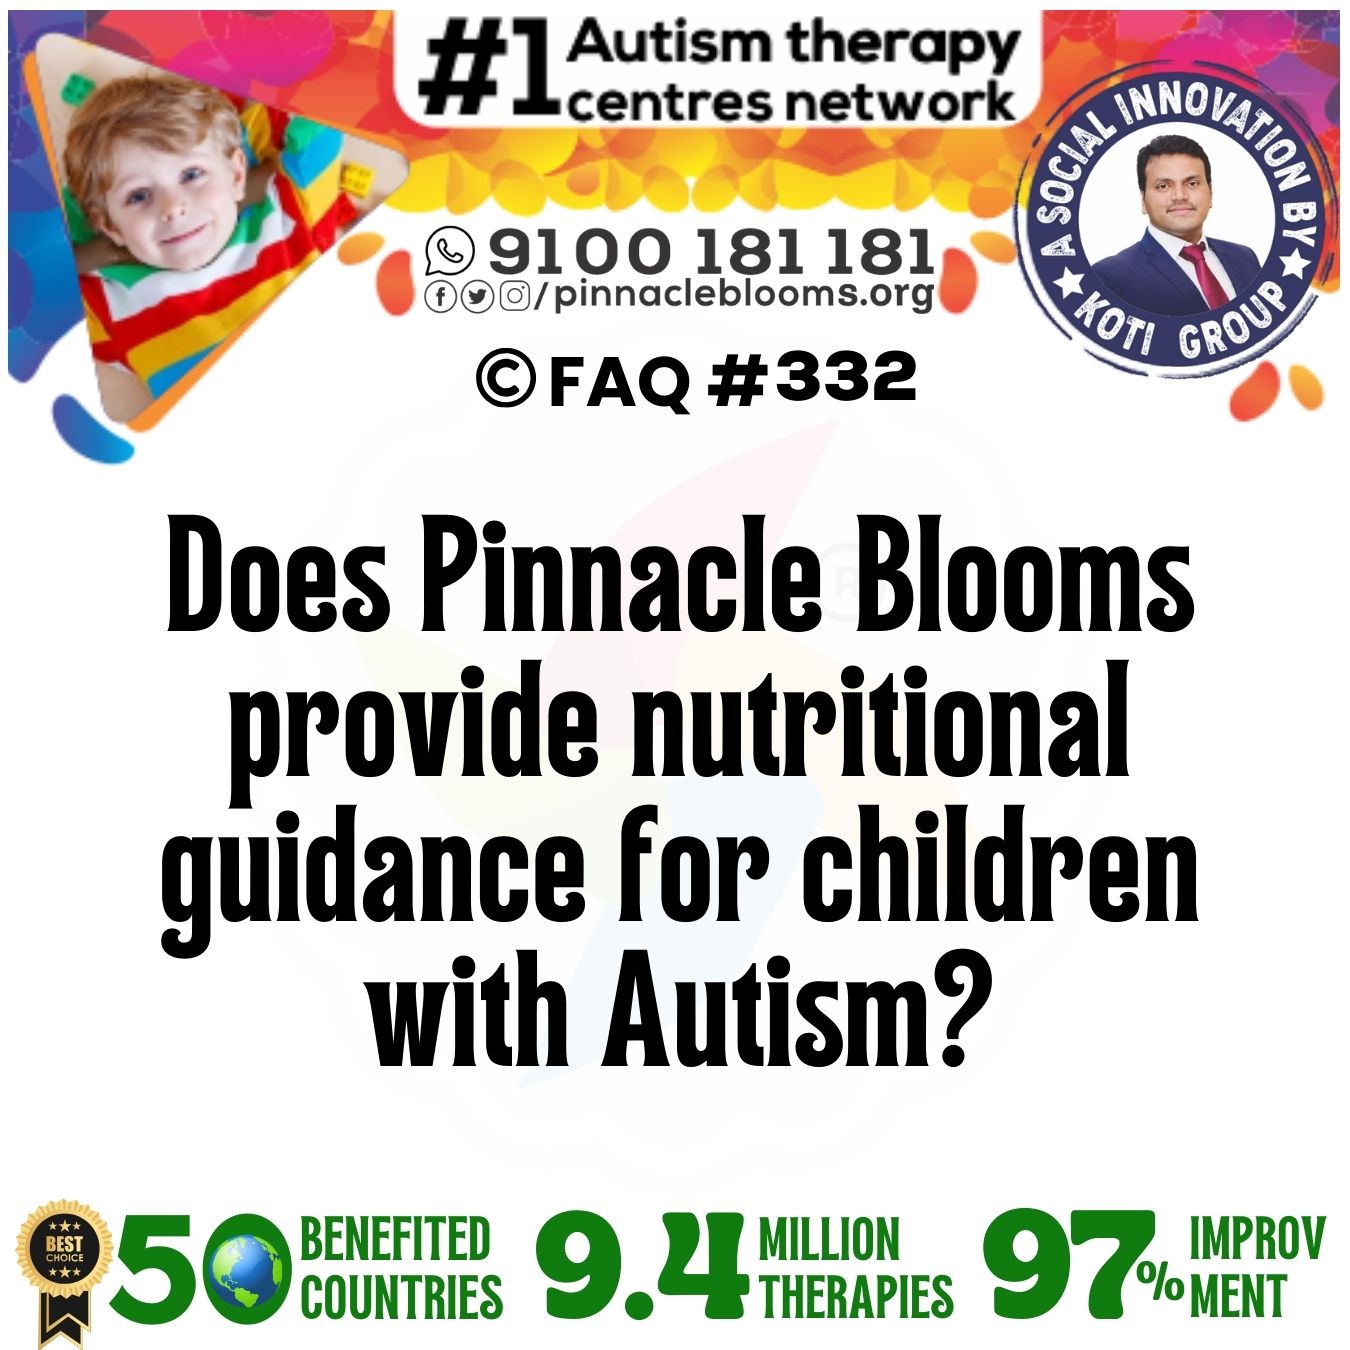 Does Pinnacle Blooms provide nutritional guidance for children with Autism?